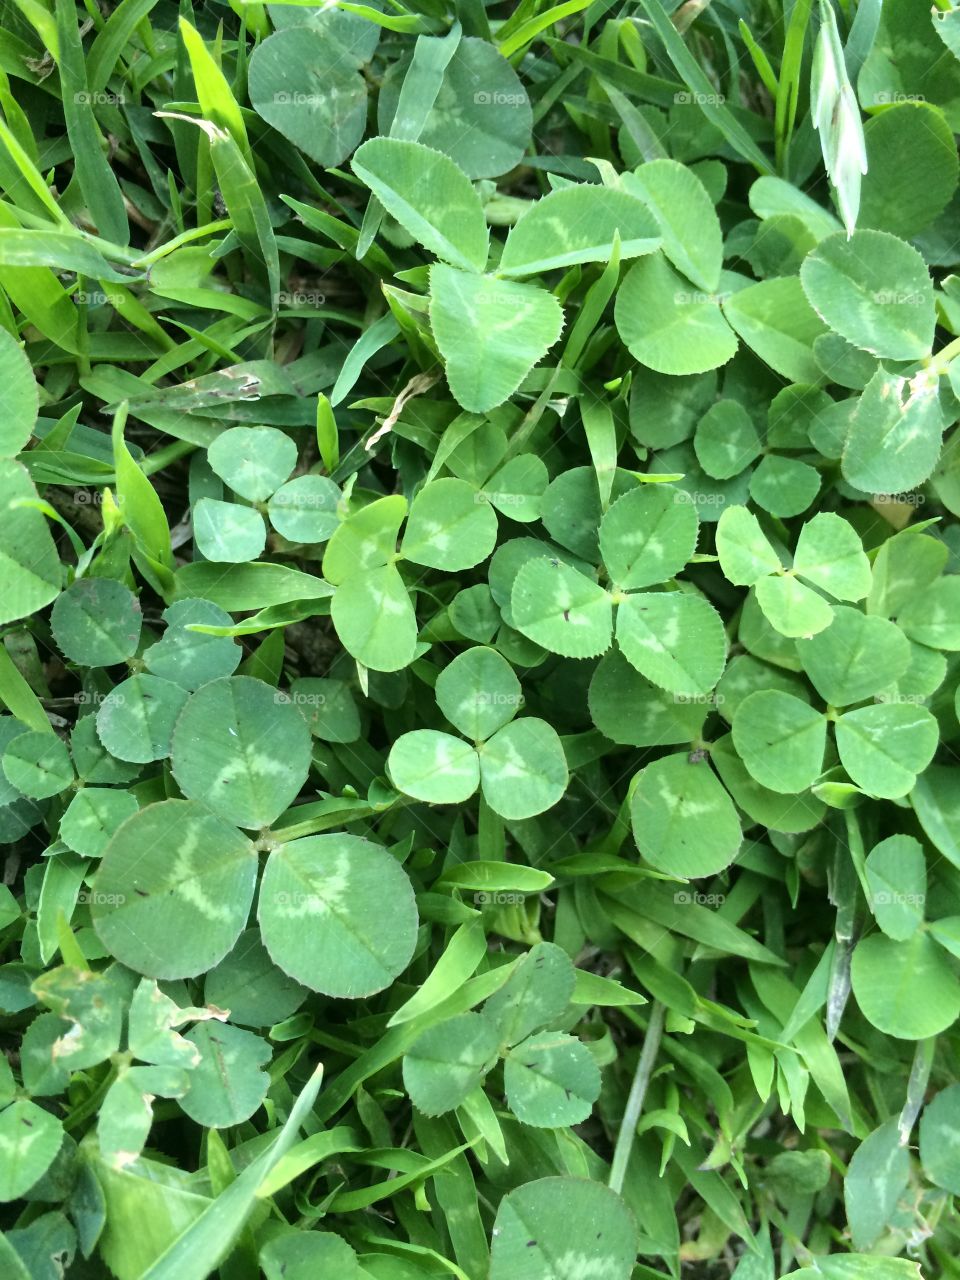 Clover patch. Patch of clover